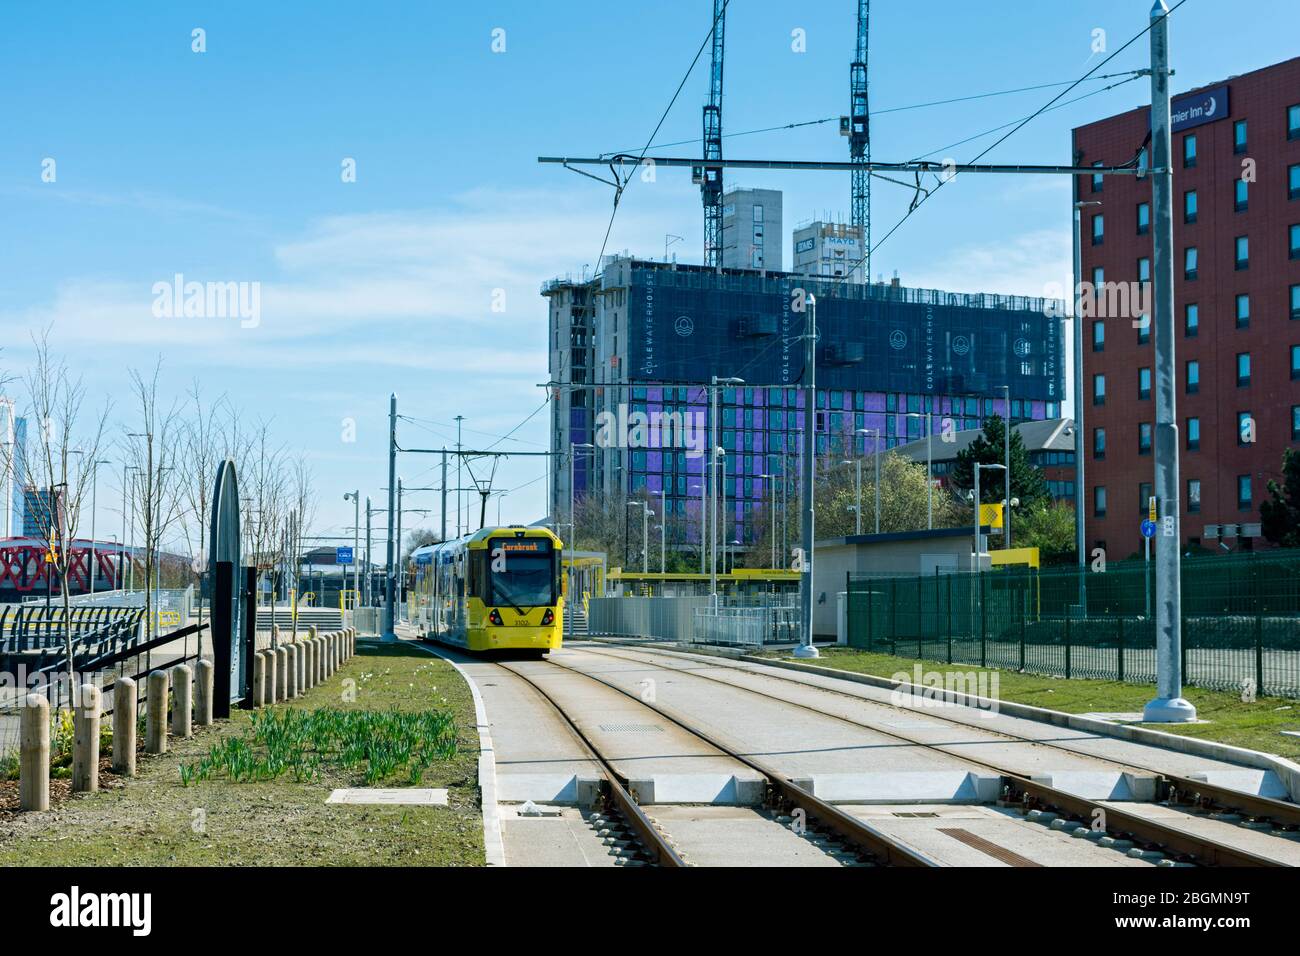 Metrolink tram approaching the Wharfside stop on the opening day of the Trafford Park Line, 22 March 2020.  Wharfside, Old Trafford, Manchester, UK Stock Photo